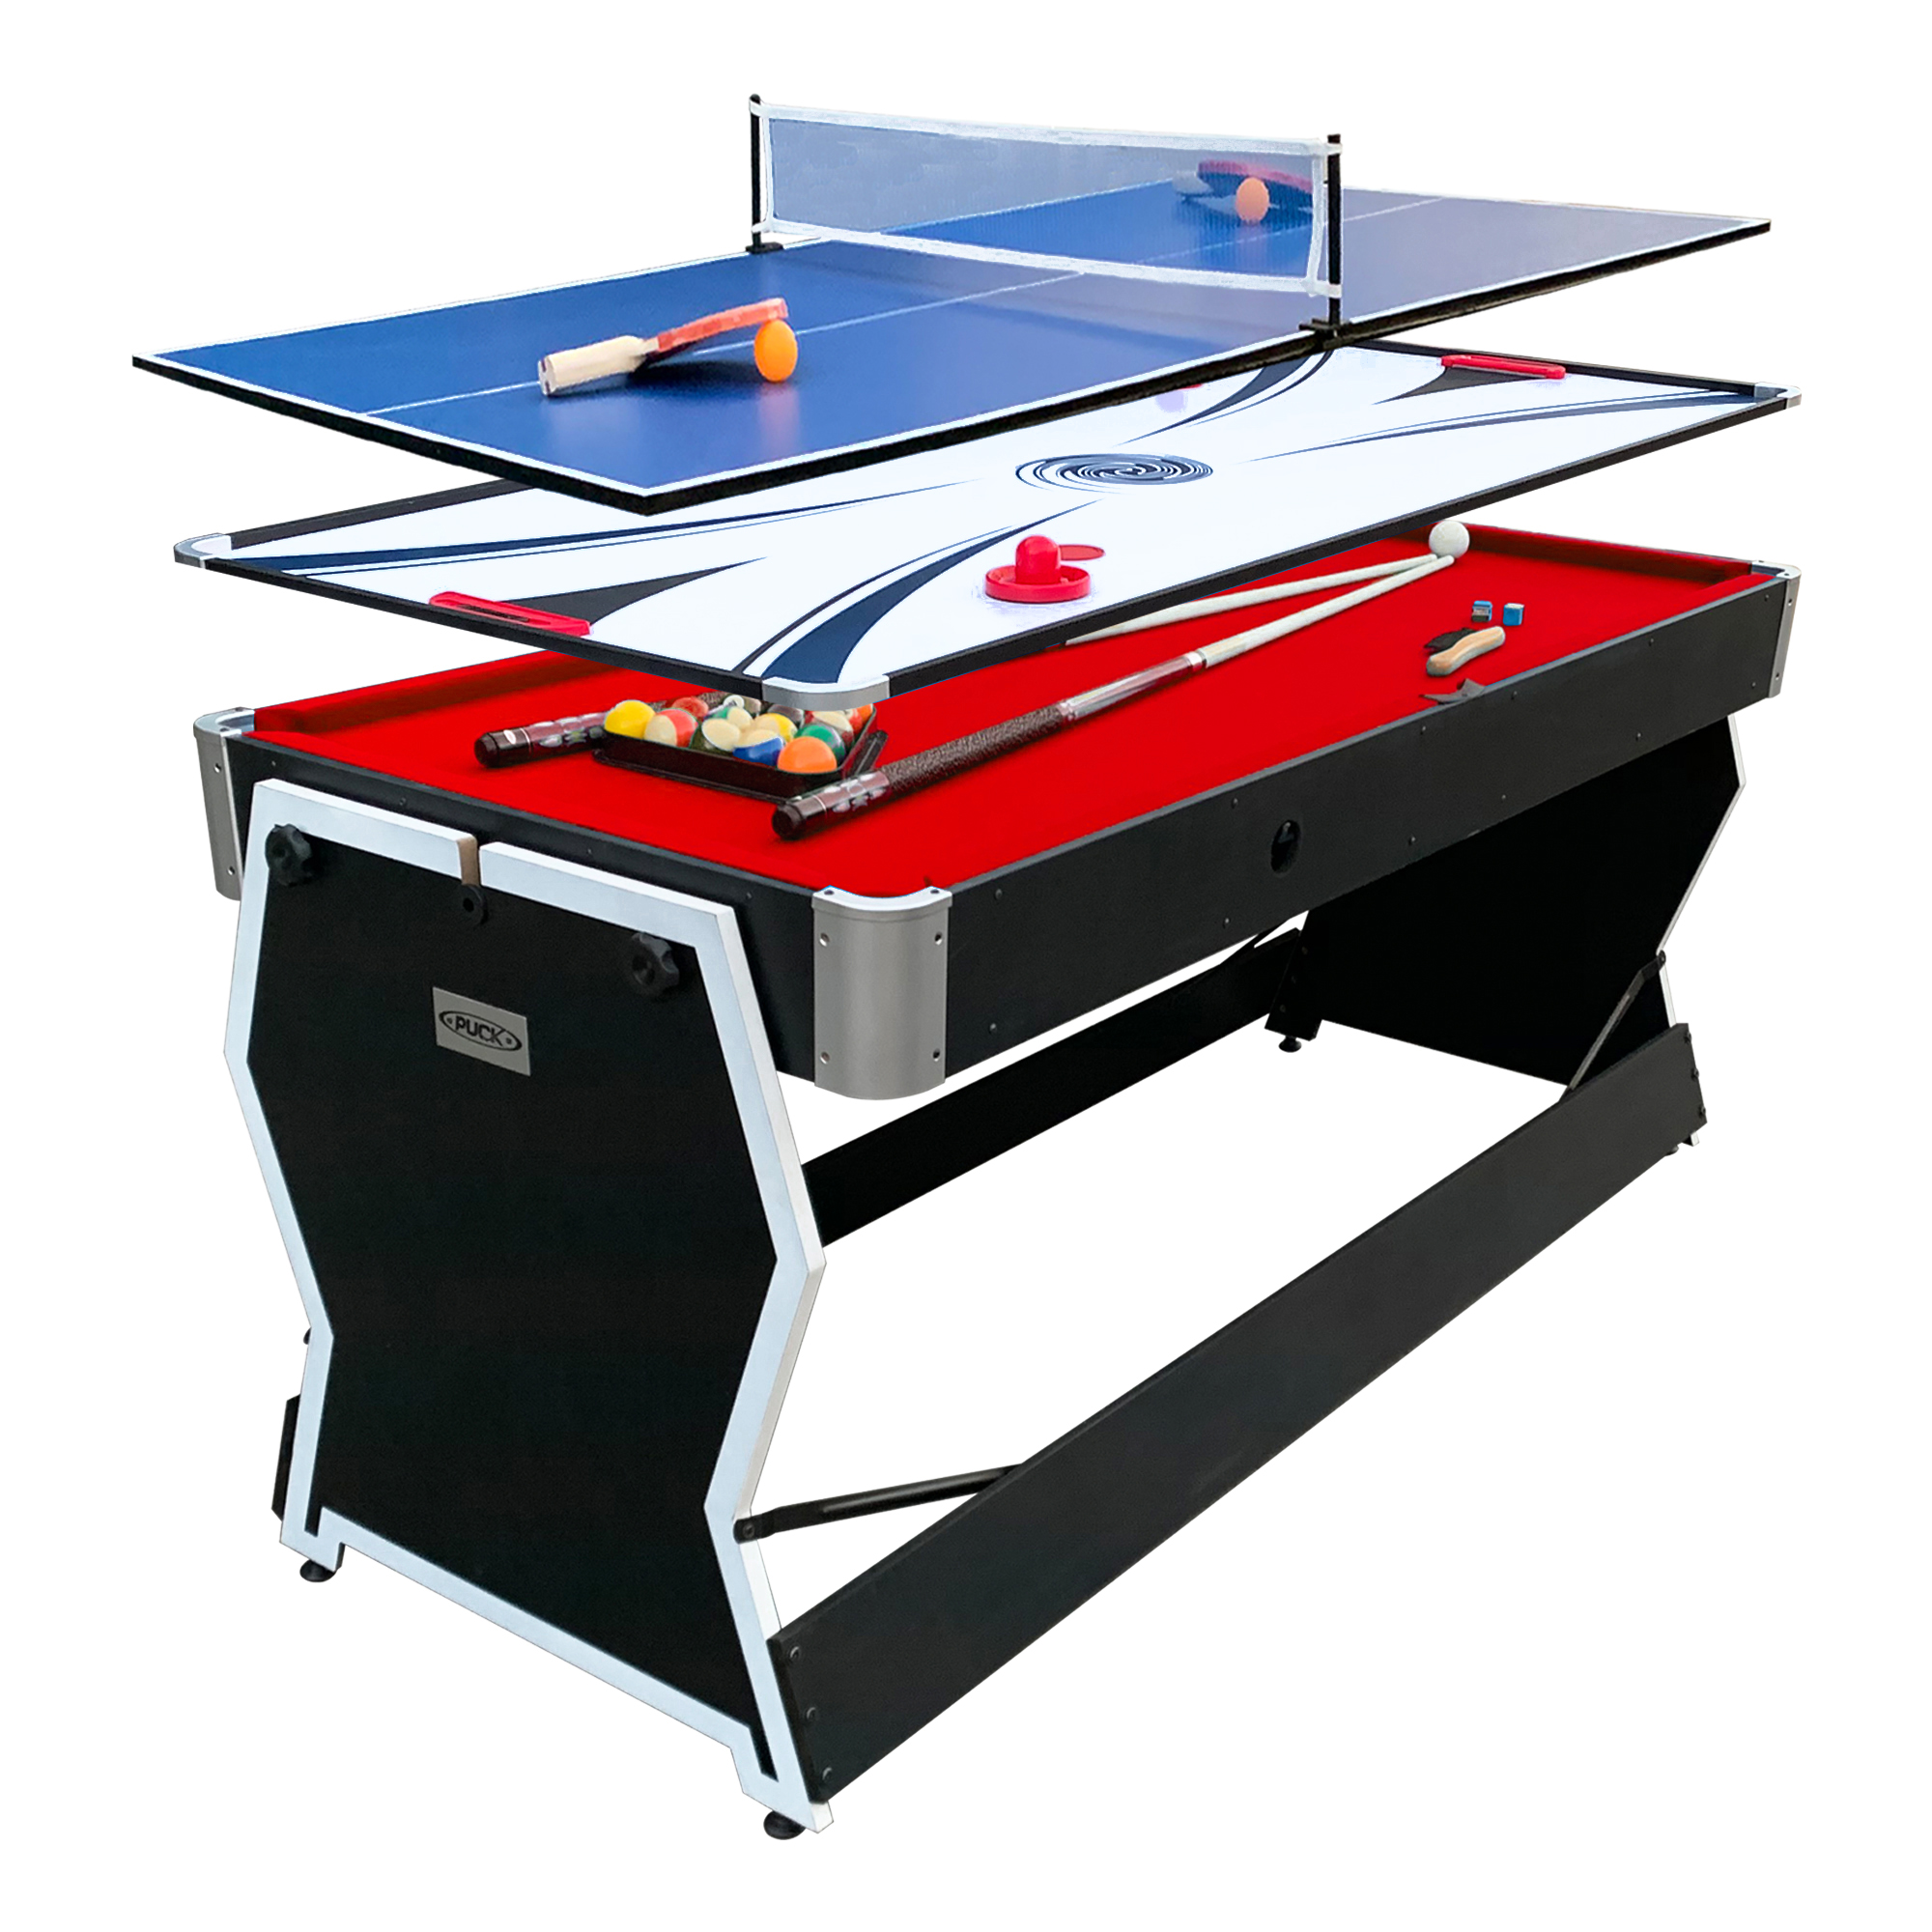 PUCK Cyclone 6-Foot 3-in-1 Multi Game Air Hockey/Billiard Table with its 3 variations